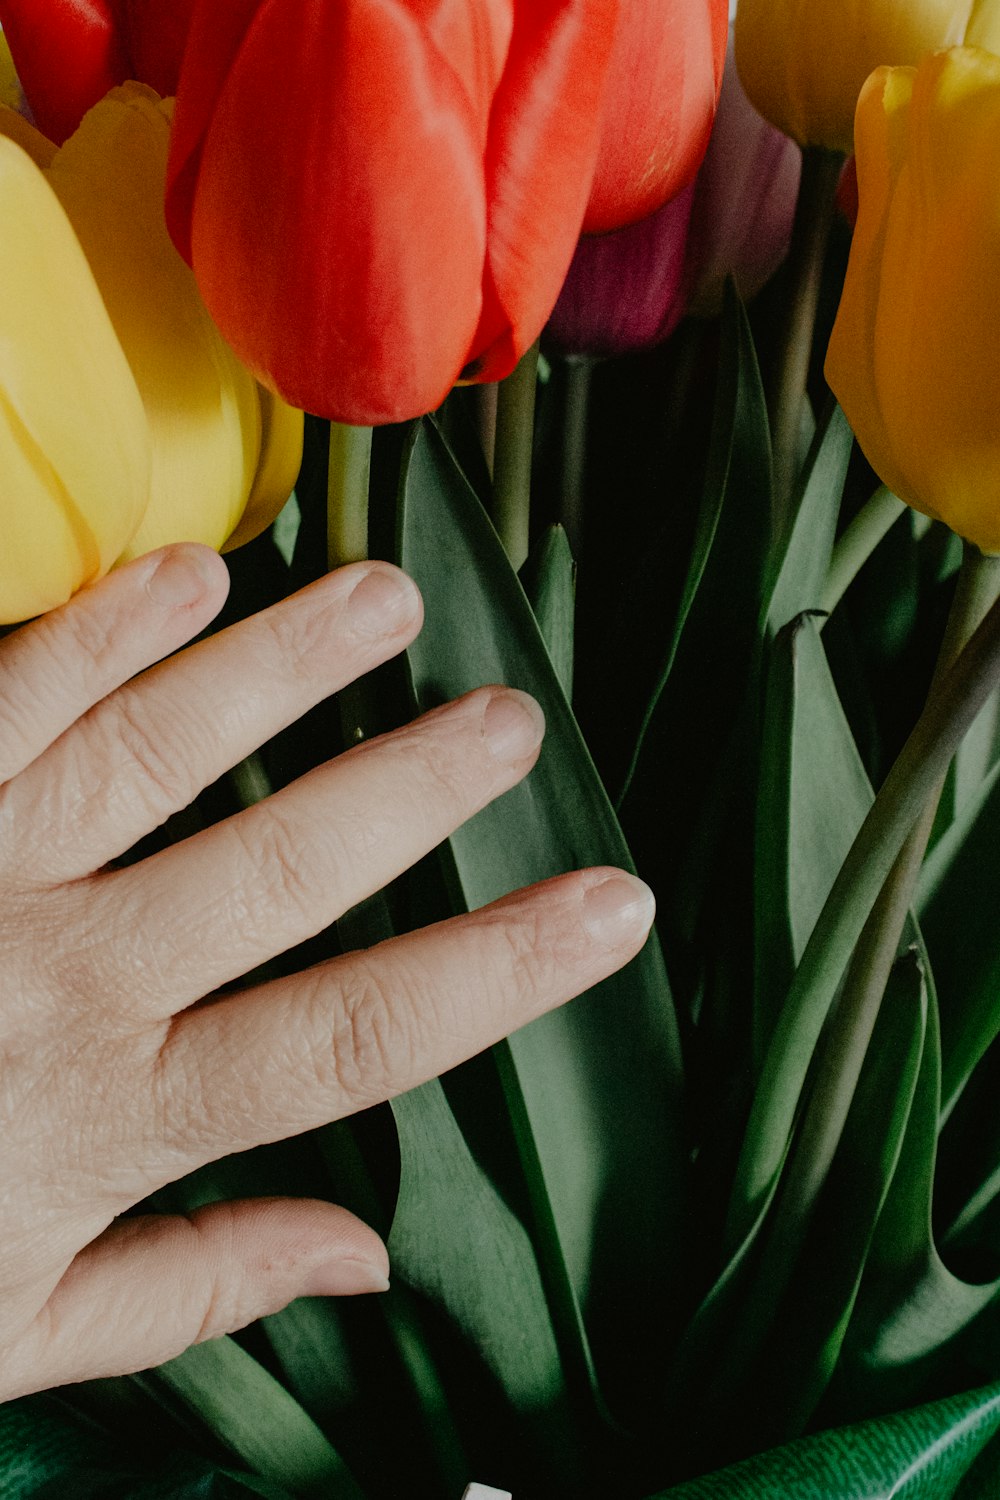 a close up of a person's hand near a bouquet of flowers